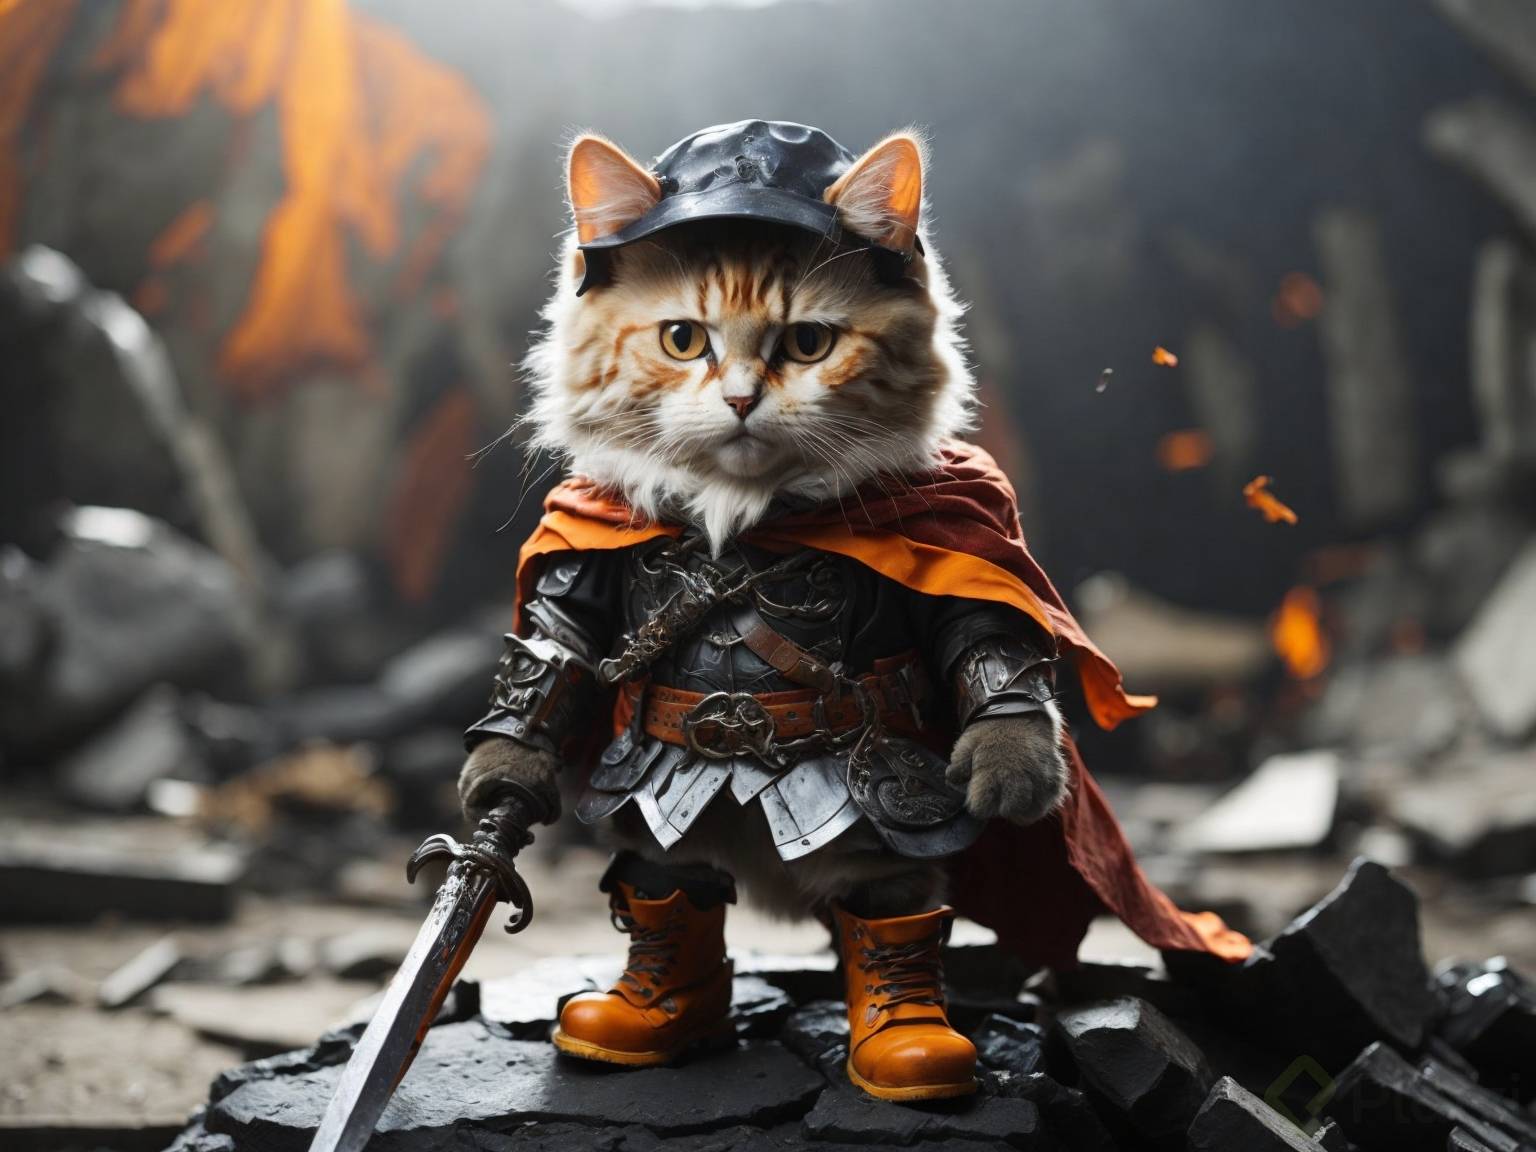 Leonardo_Diffusion_A_cat_with_orange_boots_wearing_a_hat_a_cap_3.jpg